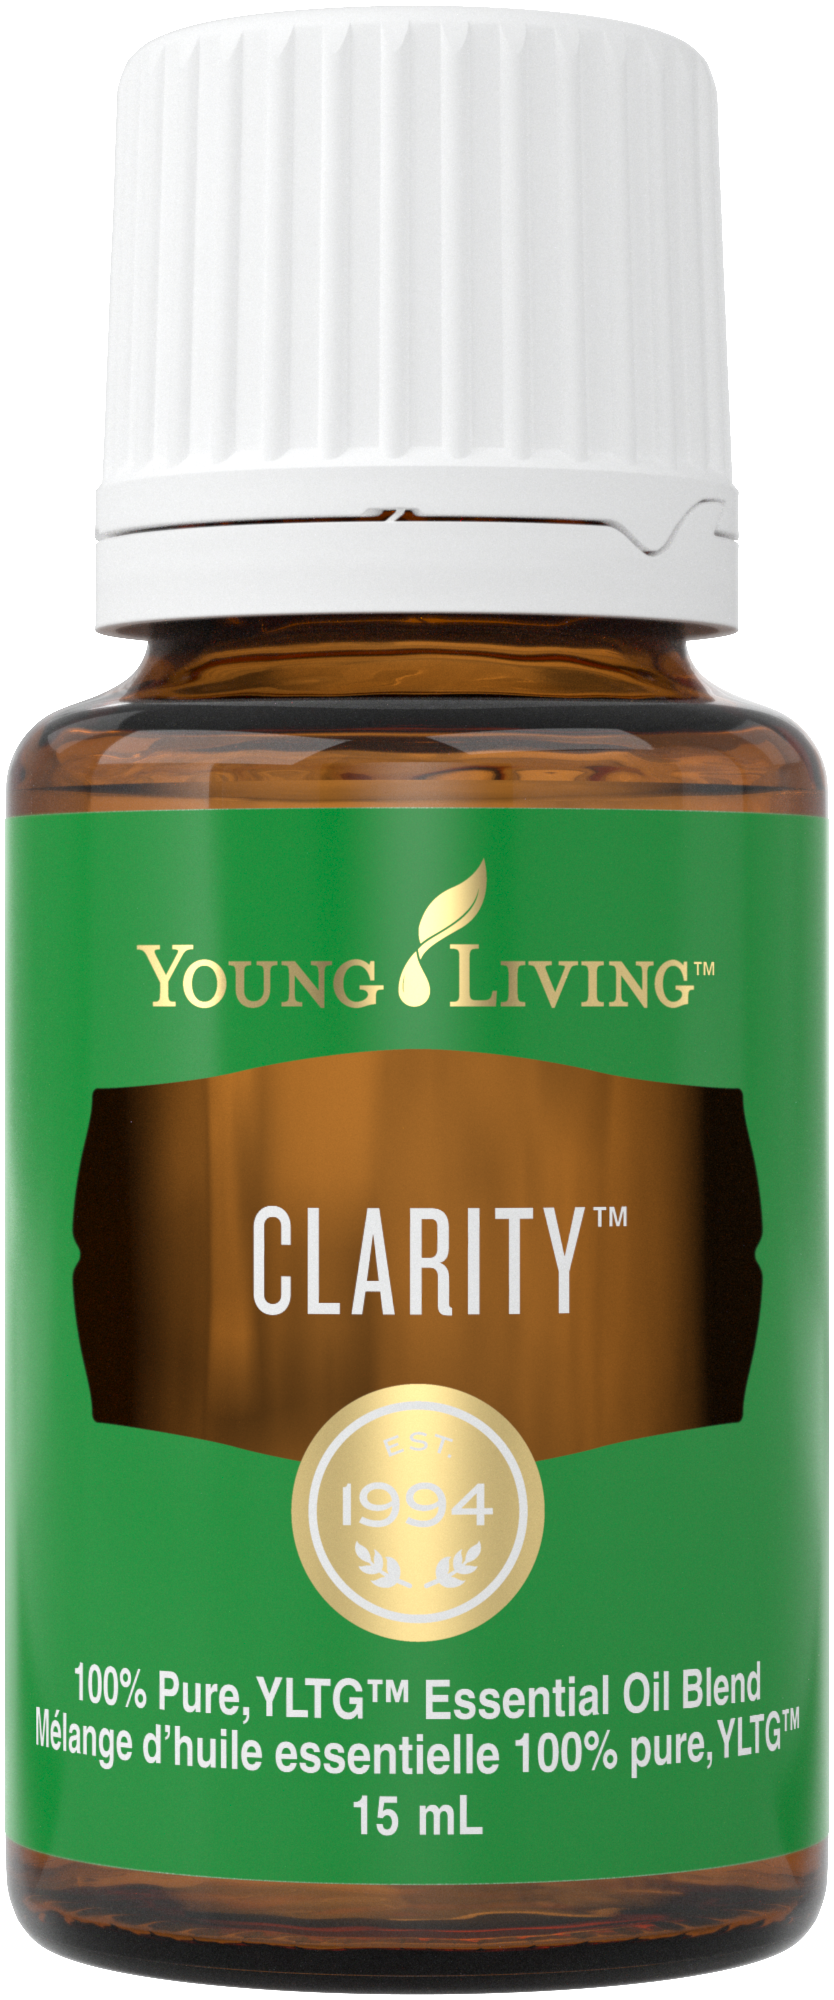 YL - Essential Oil Blend - Clarity